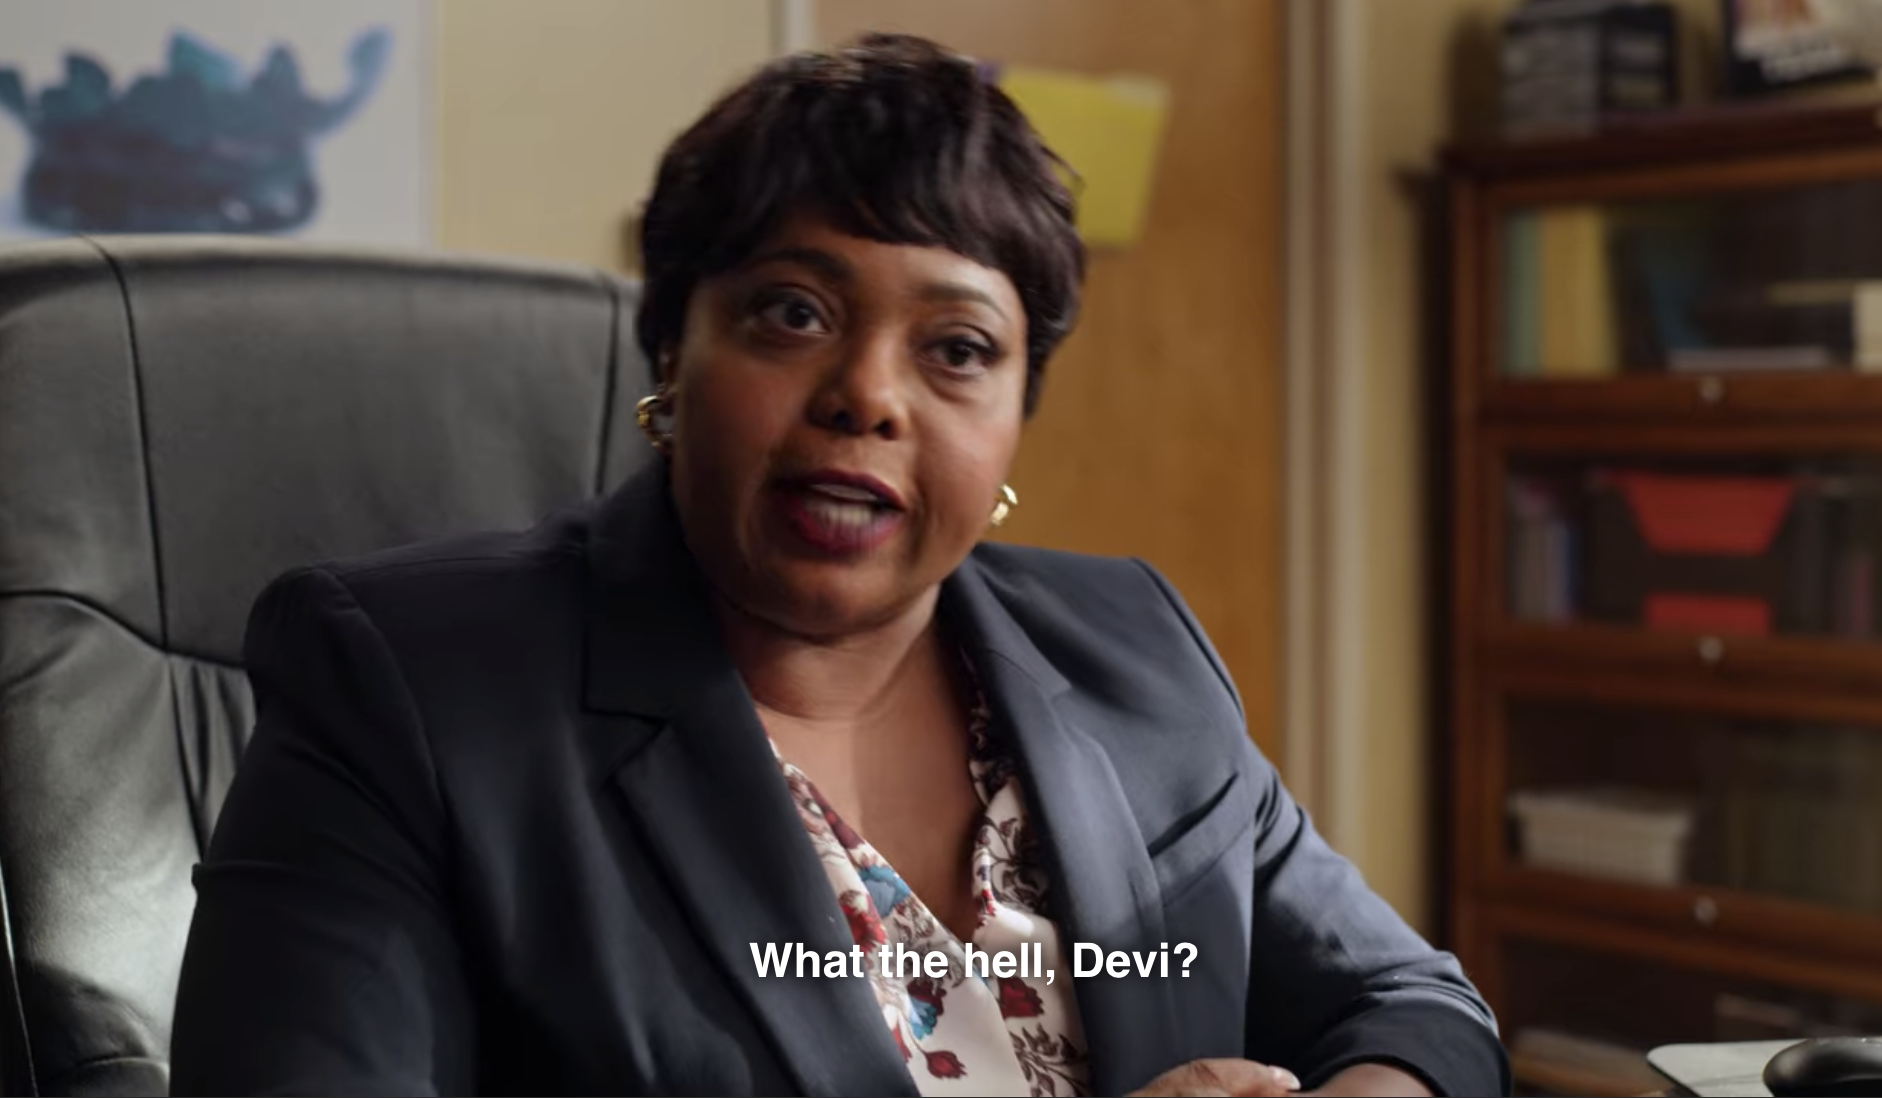 Principal Grubbs: "What the hell, Devi?"